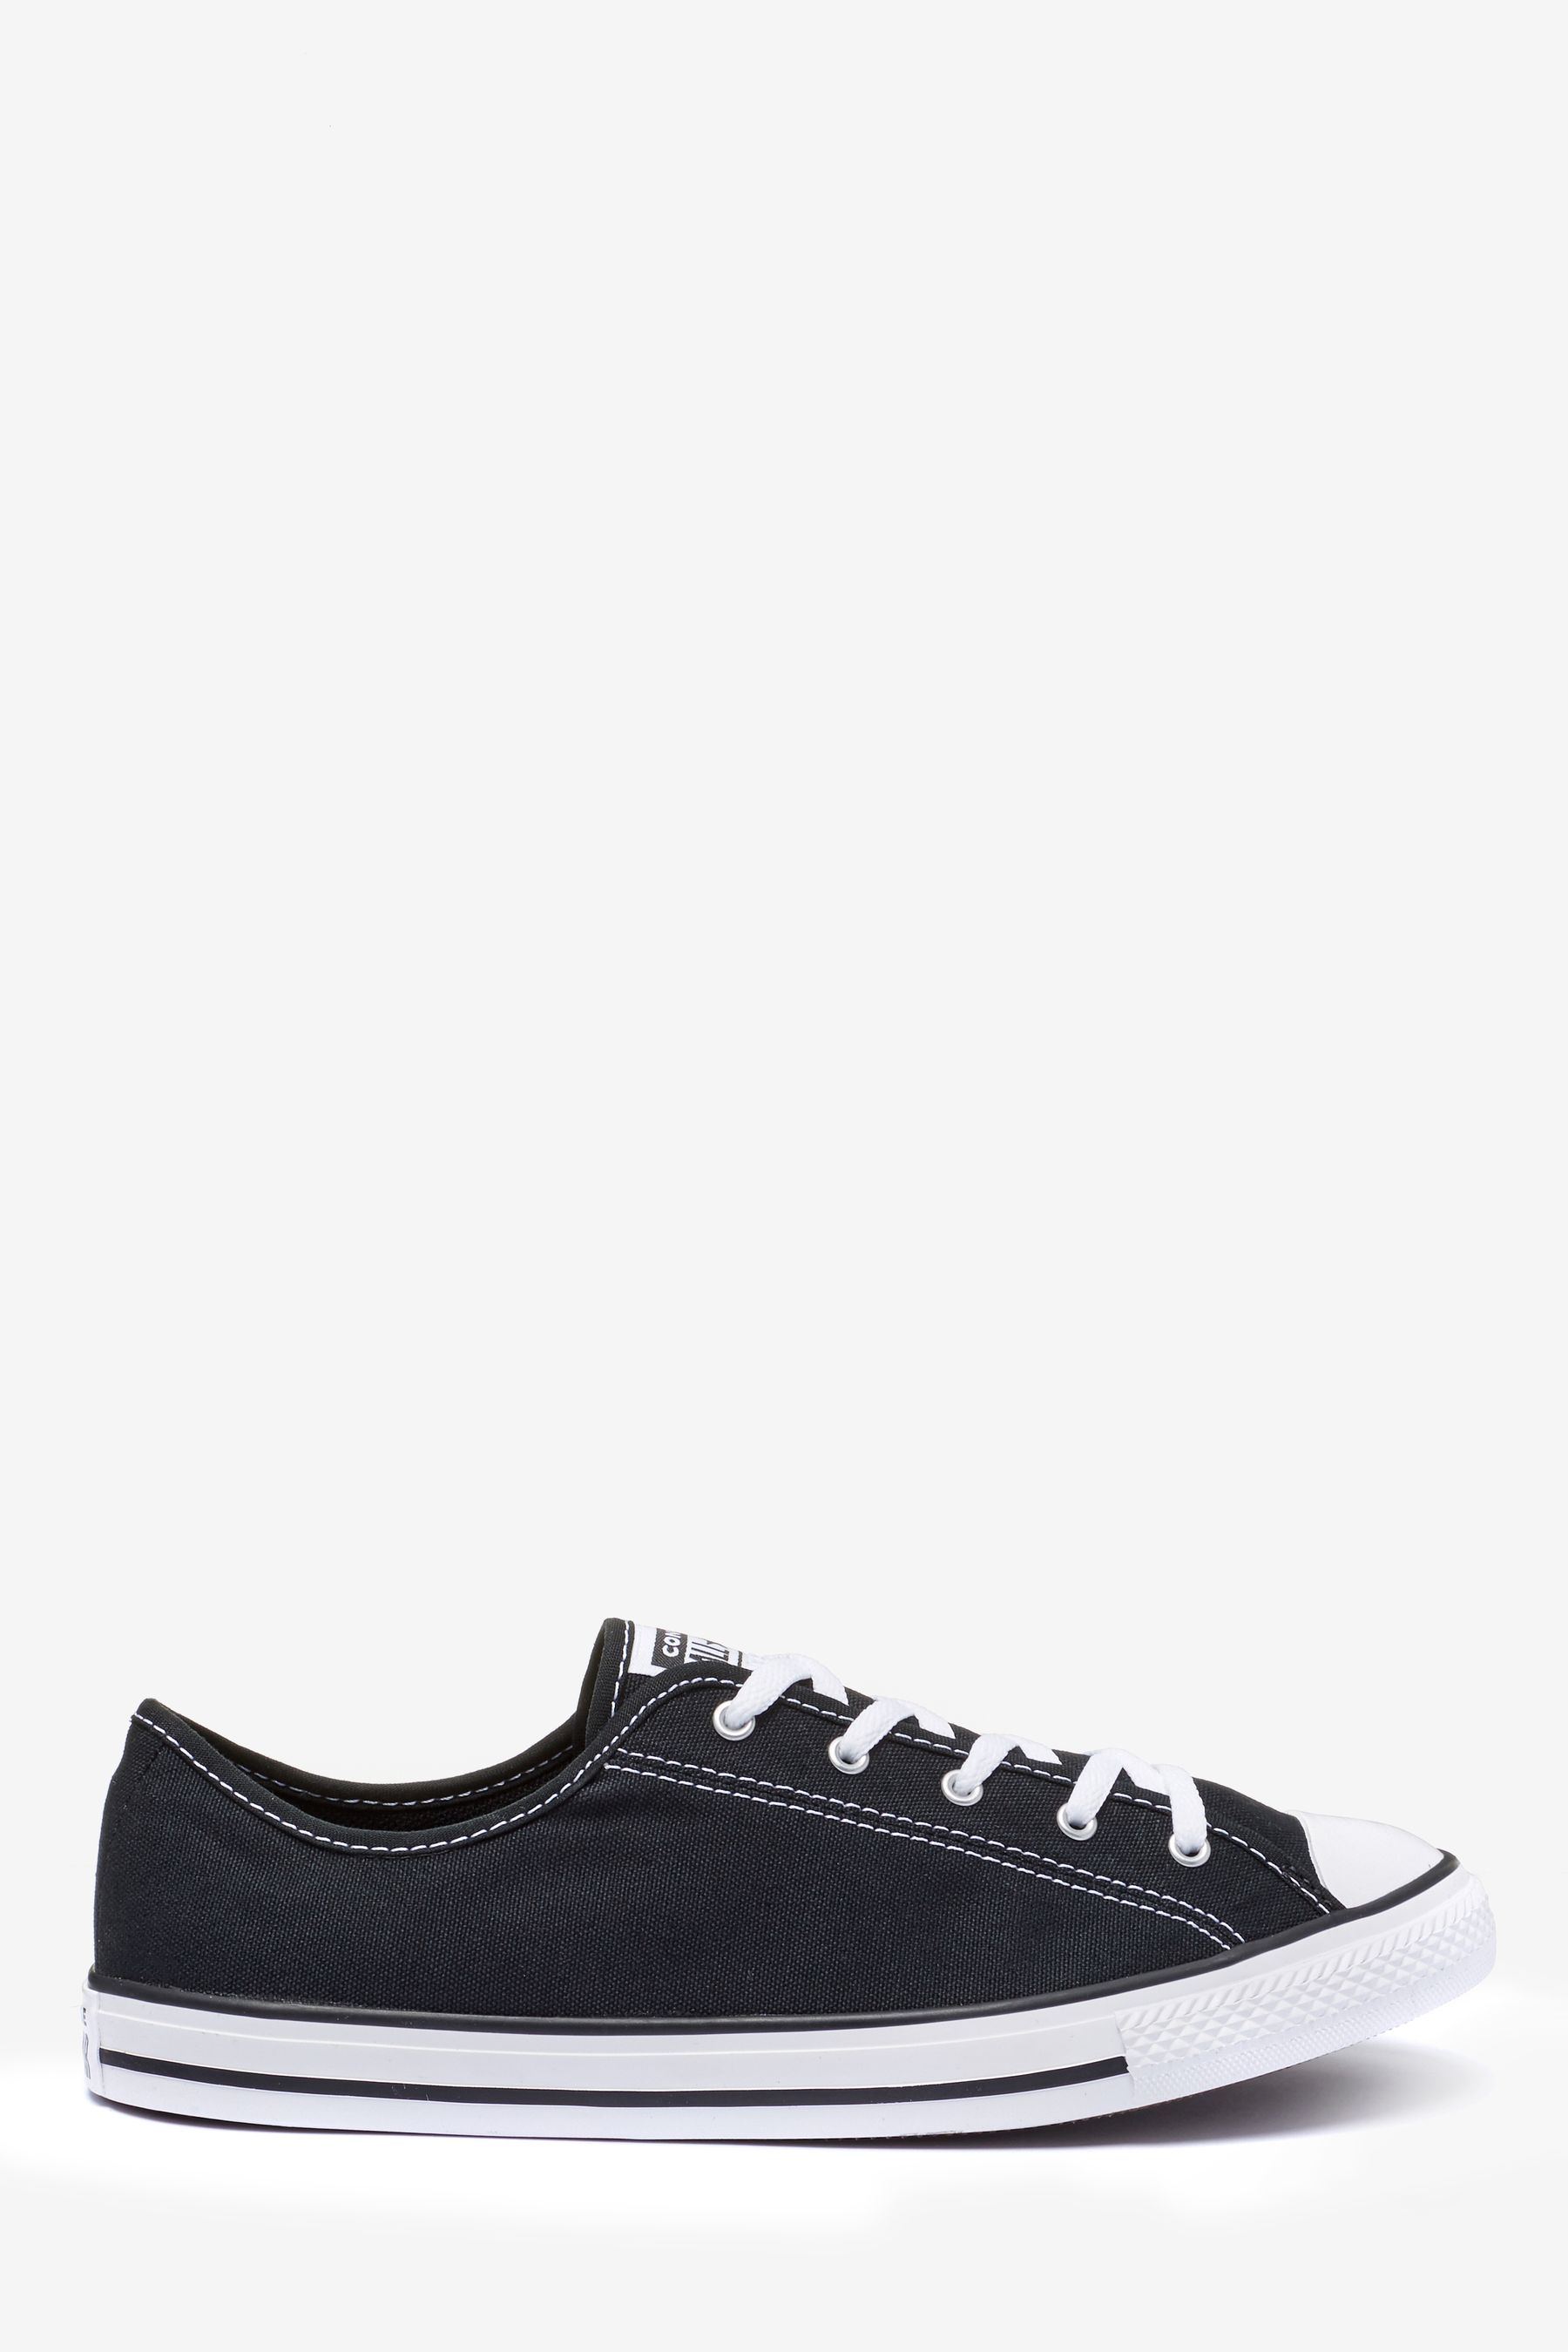 Buy Converse Black Dainty Trainers from the Next UK online shop